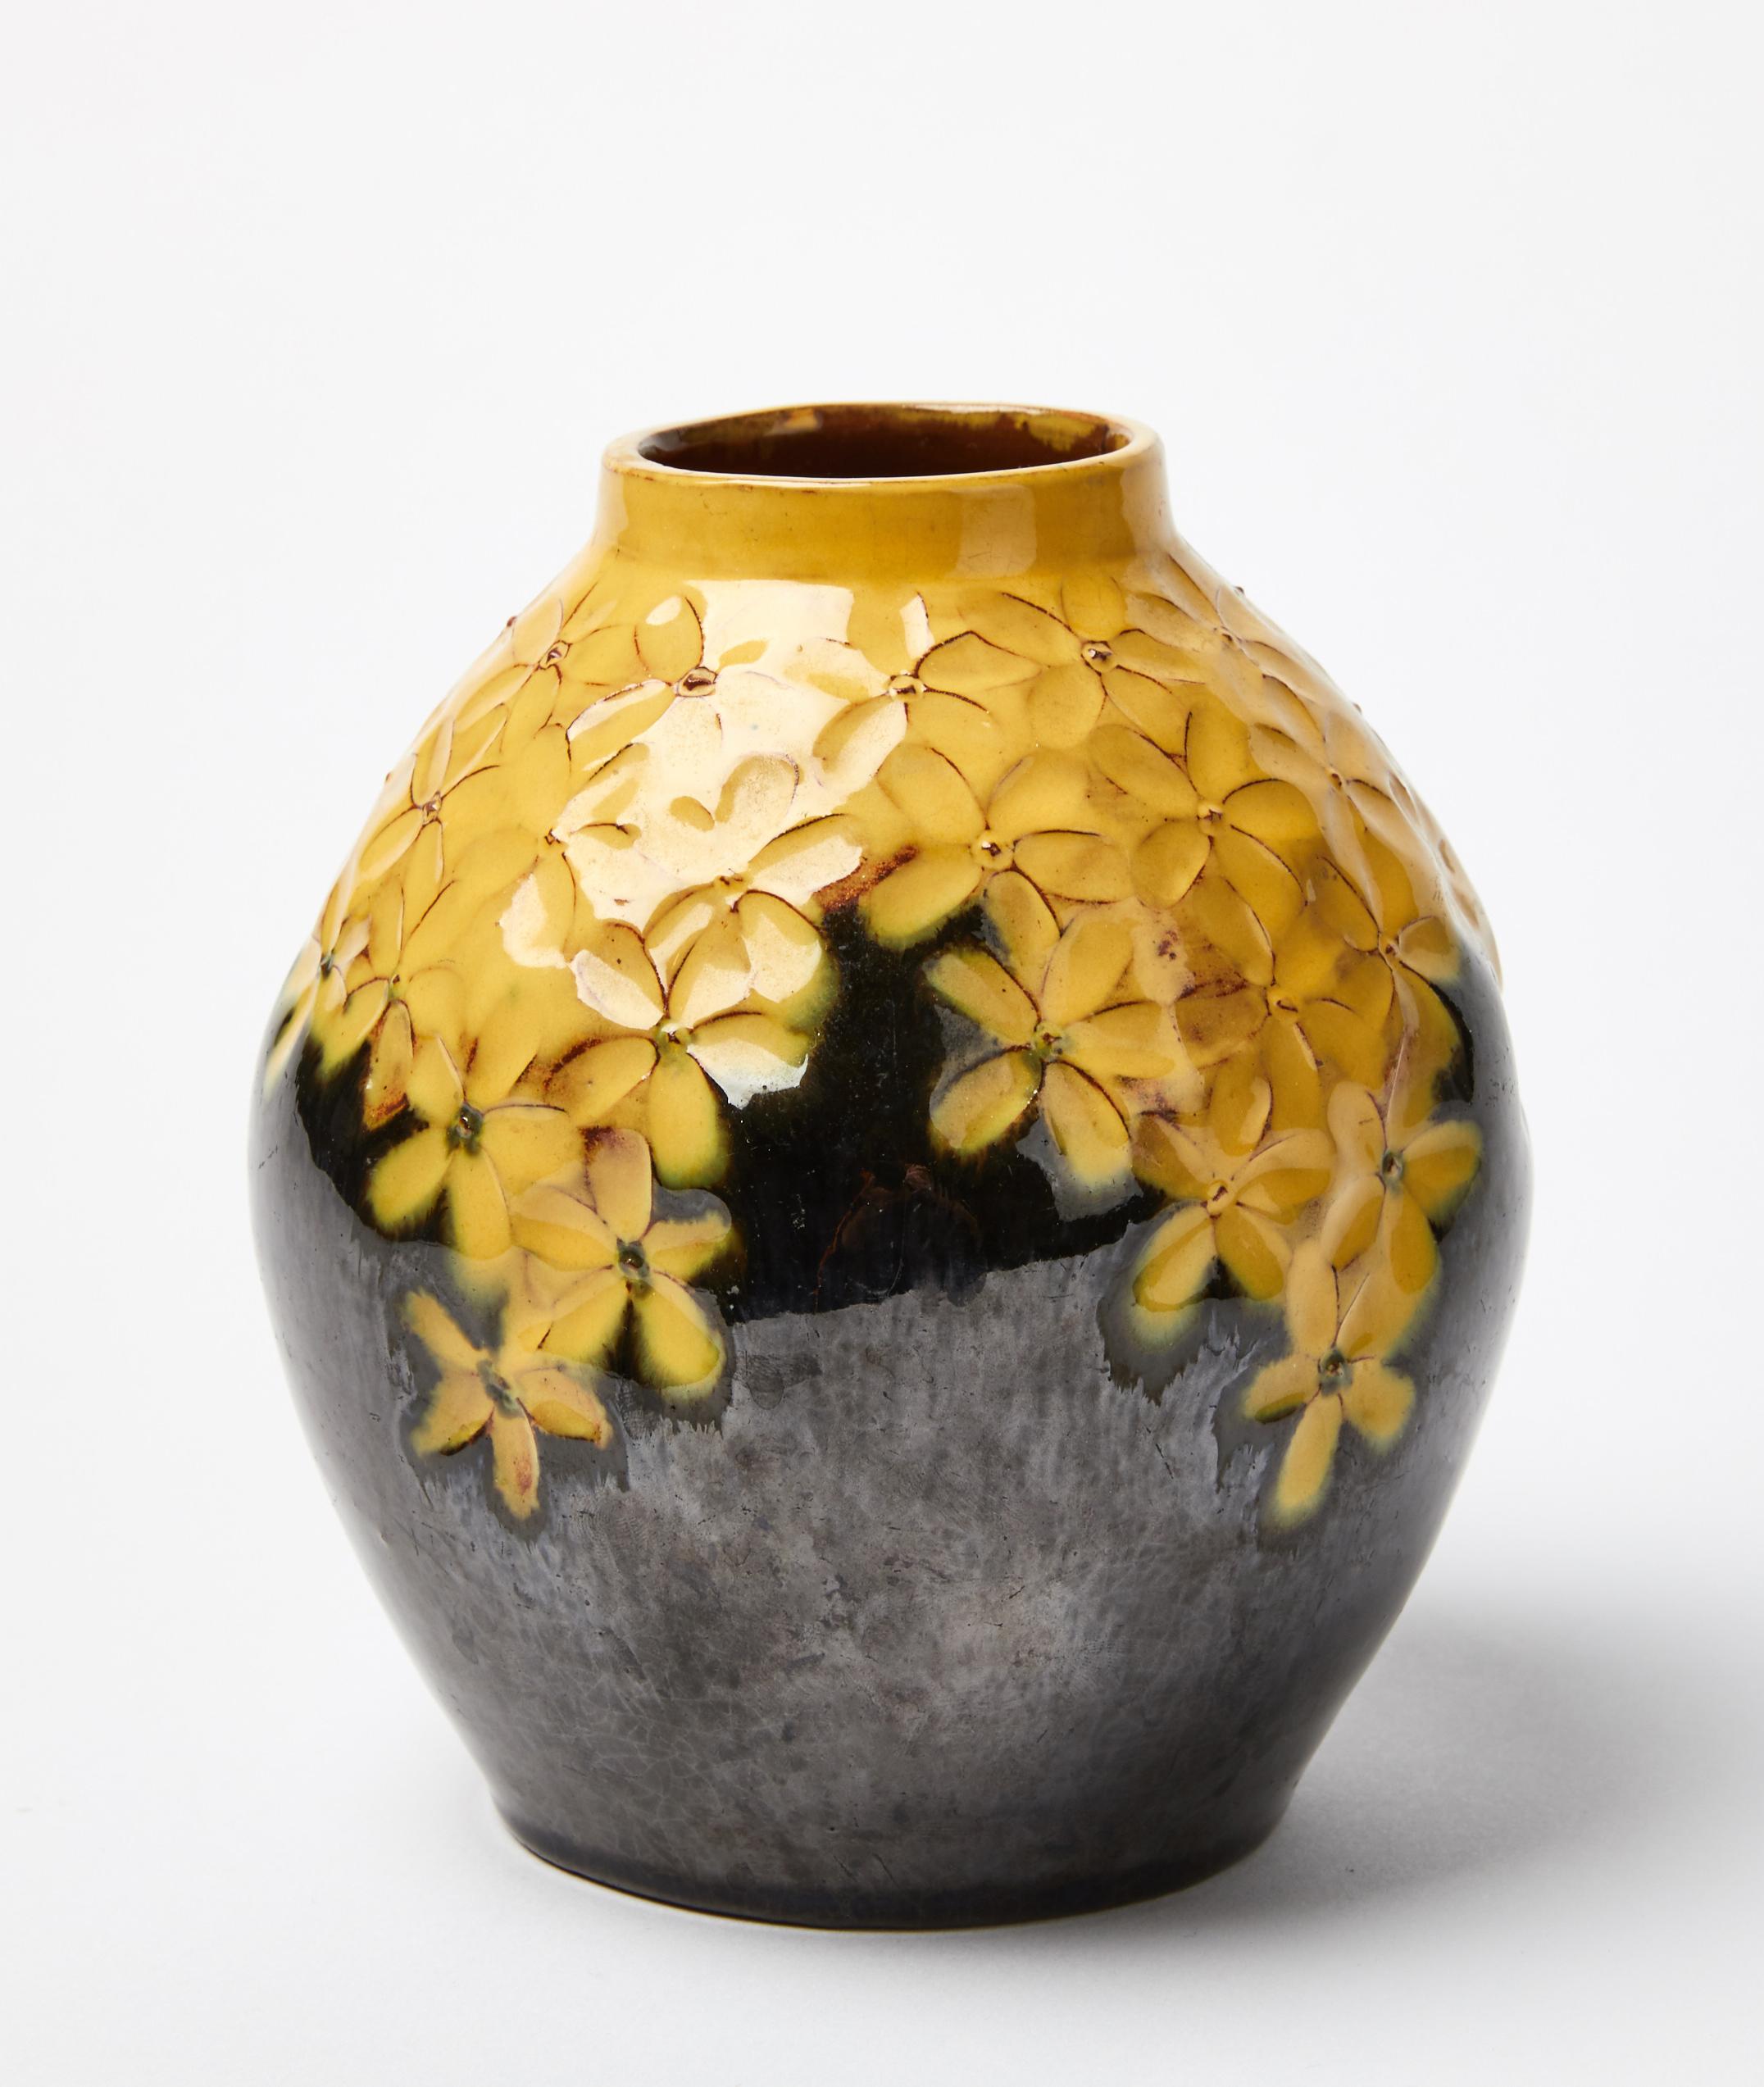 Introducing a very rare and adorable Arts and Craft Yellow Flower Vase in Irregular Shape by Hilma Persson Hjelm, Sweden. It embodies the essence of timeless elegance and. a perfect blend of artistic tradition and design. This vase is not only a